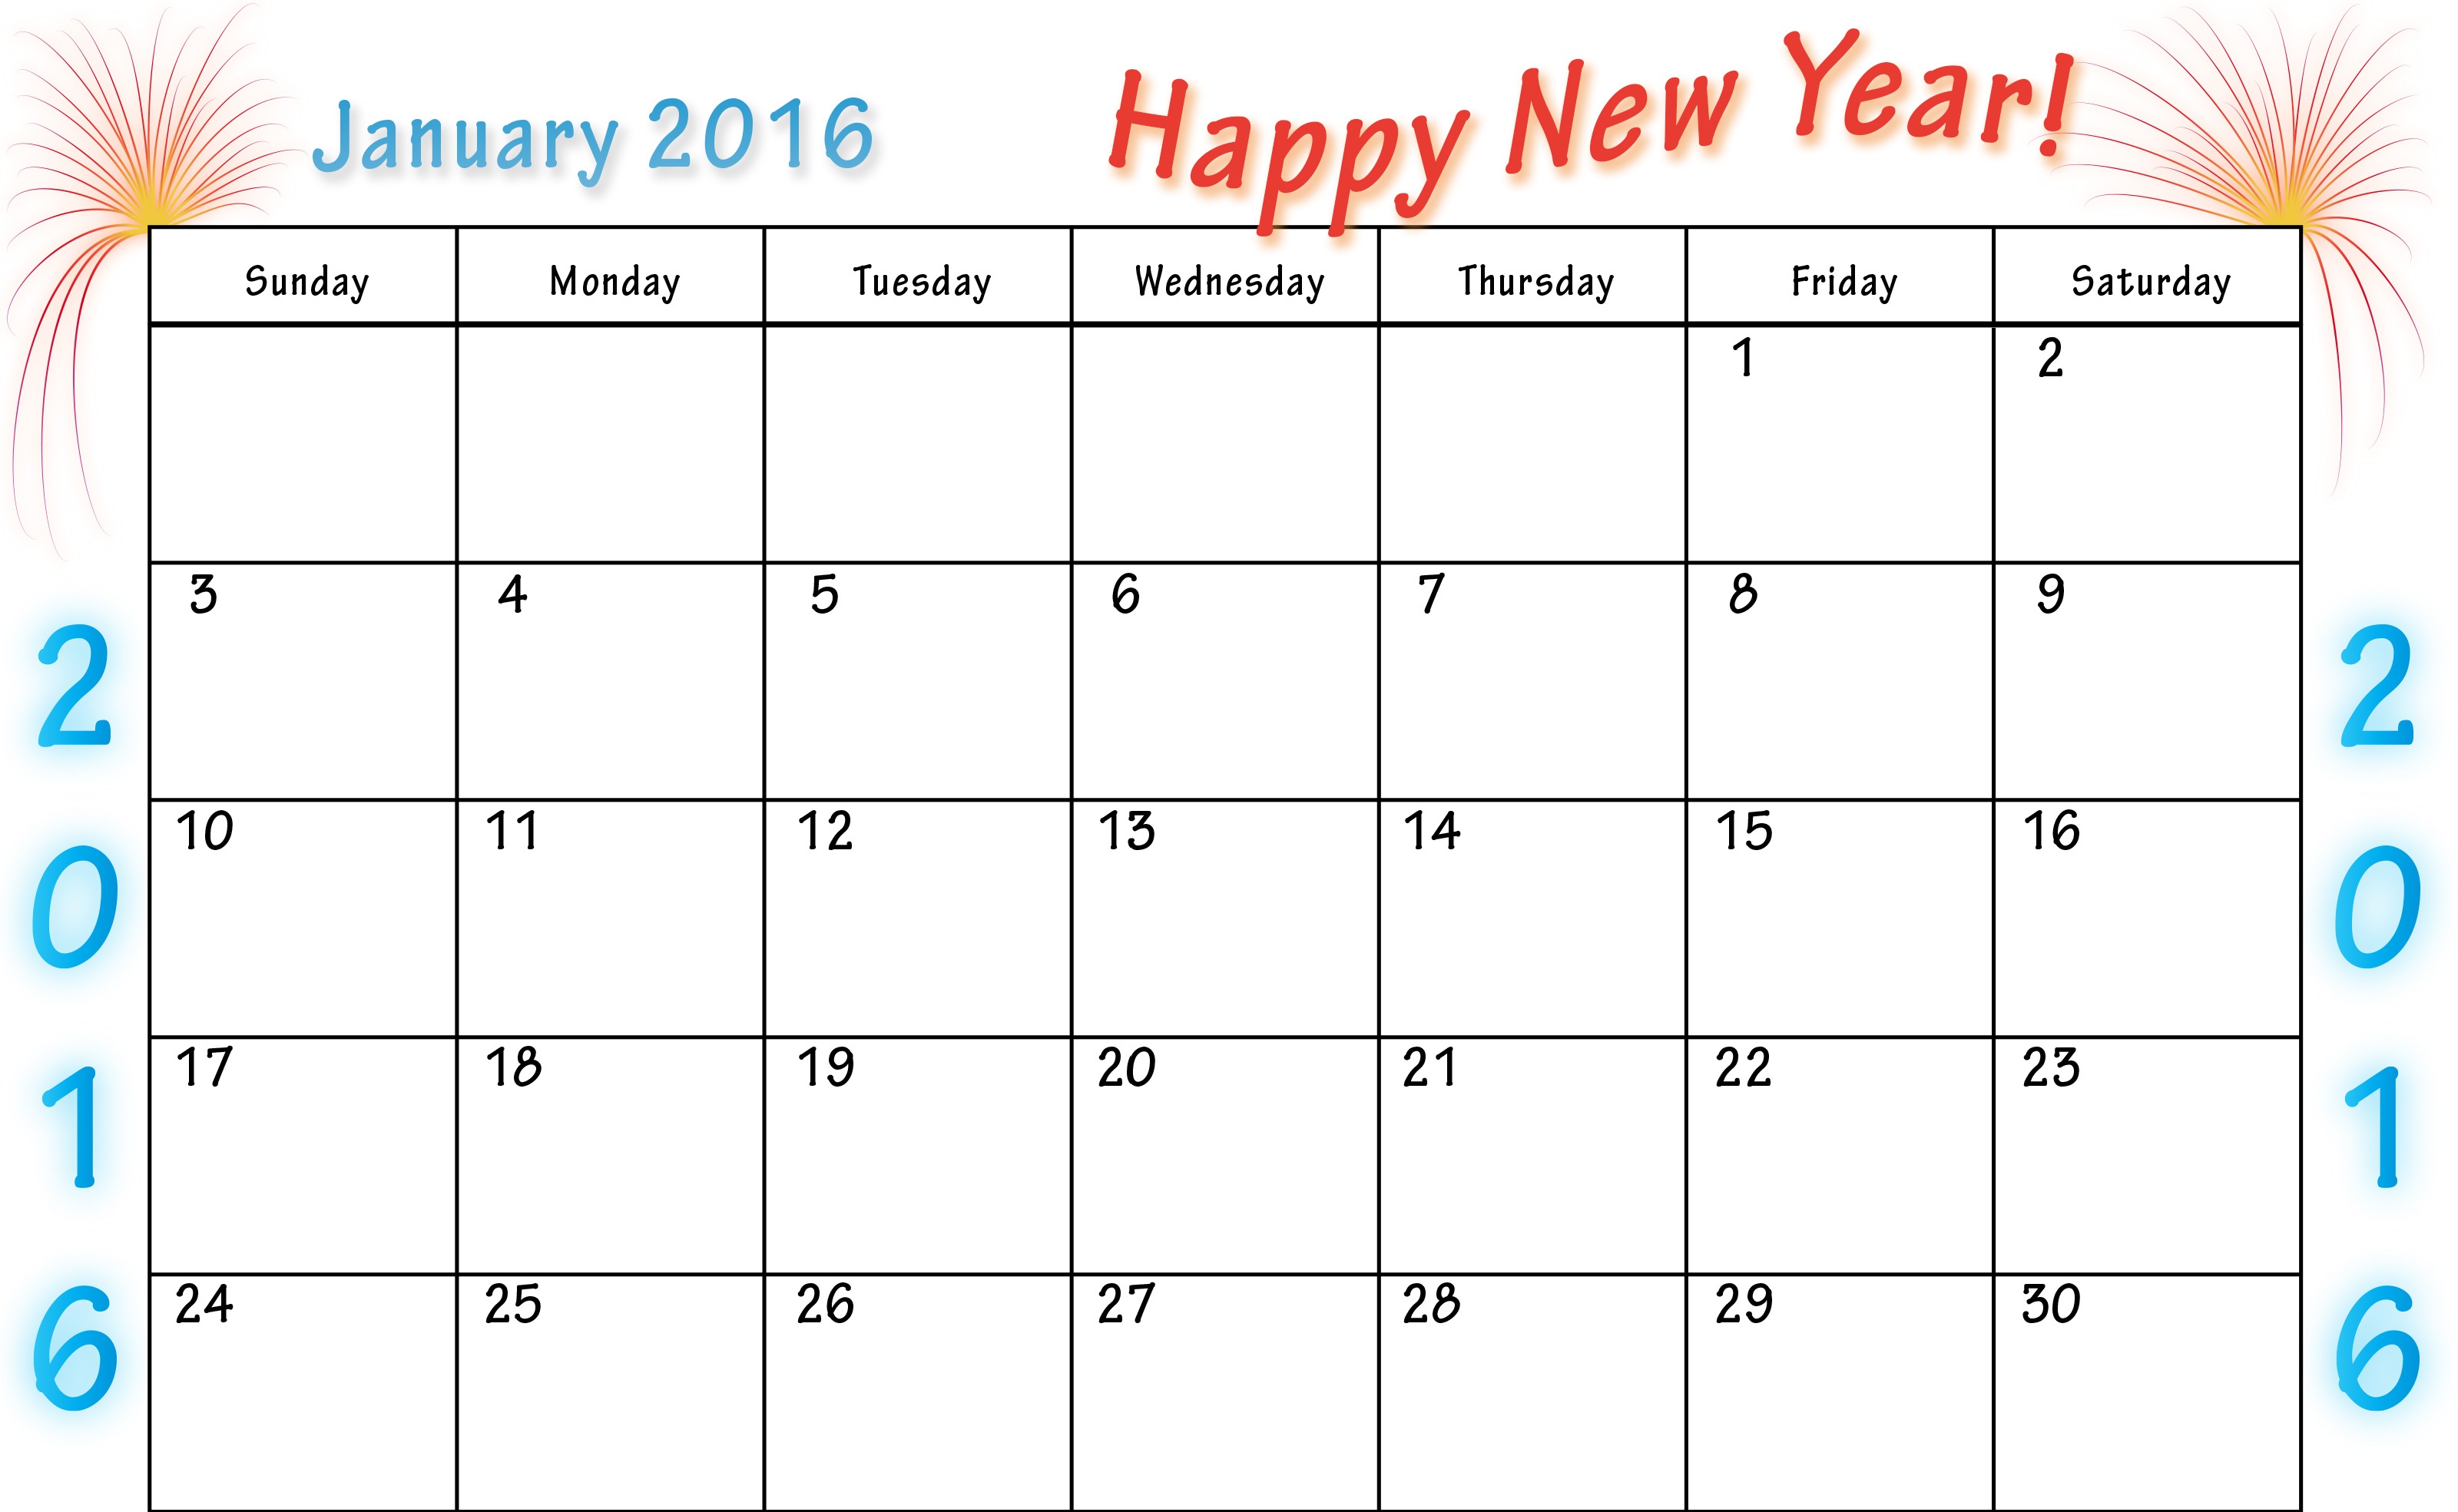  January 1 2016 By admin Comments Off on Happy New Year Calendar 2016